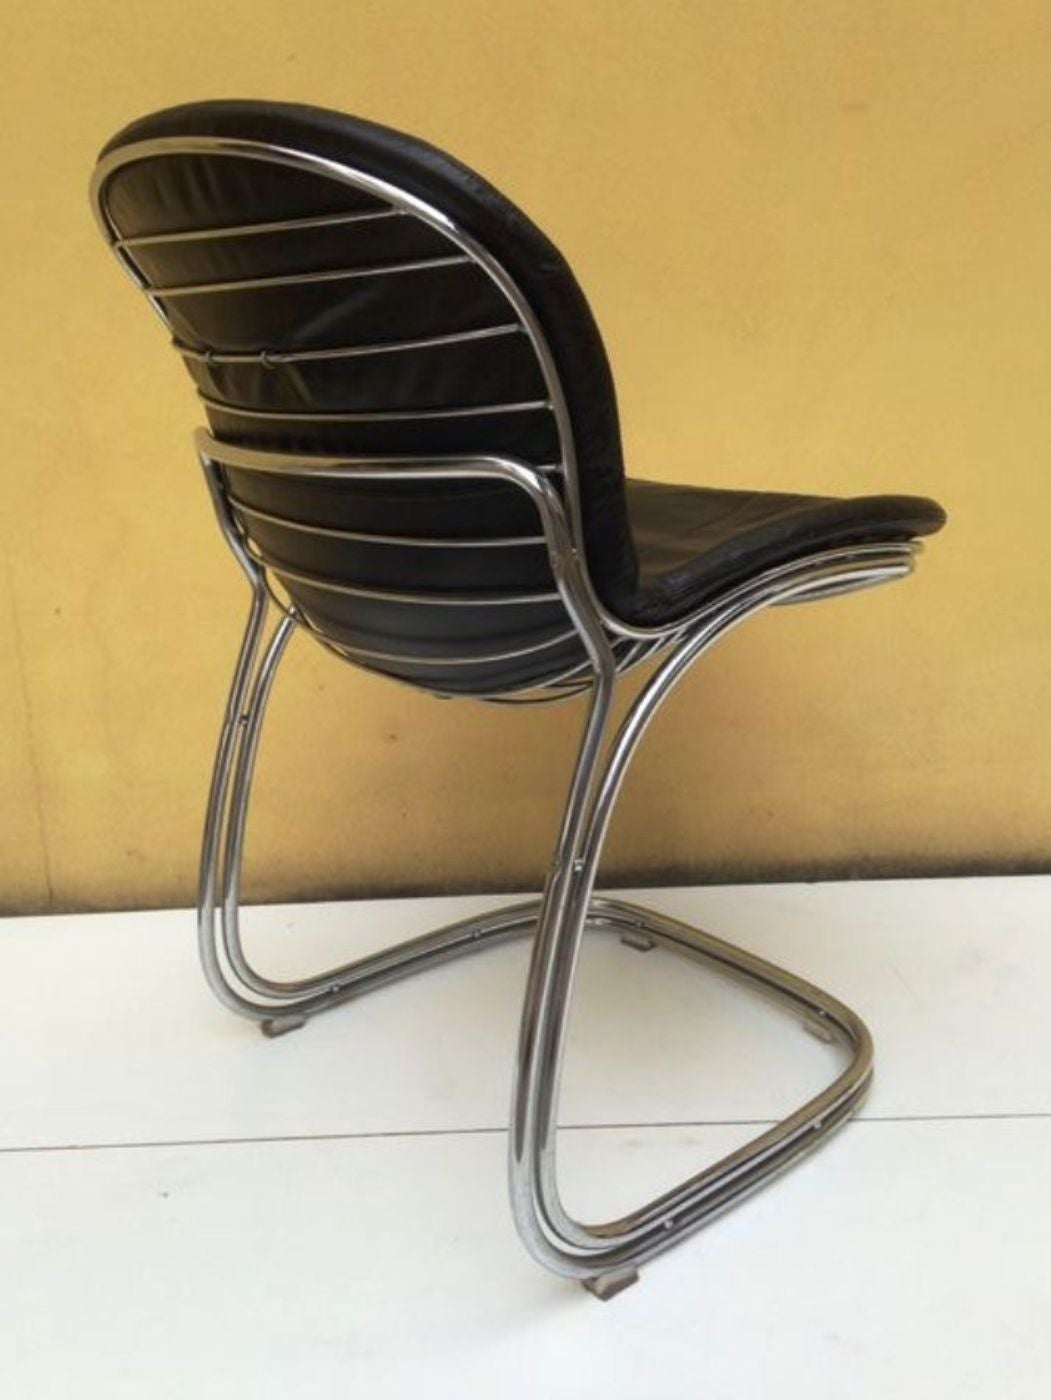 Set of 6 Sabrina Chairs in tubular metal and black leather , iconic 70's design of this Master of the Italian design

Many pieces are stored in our warehouse, so please click CONTACT DEALER under our logo to find out if the pieces you are